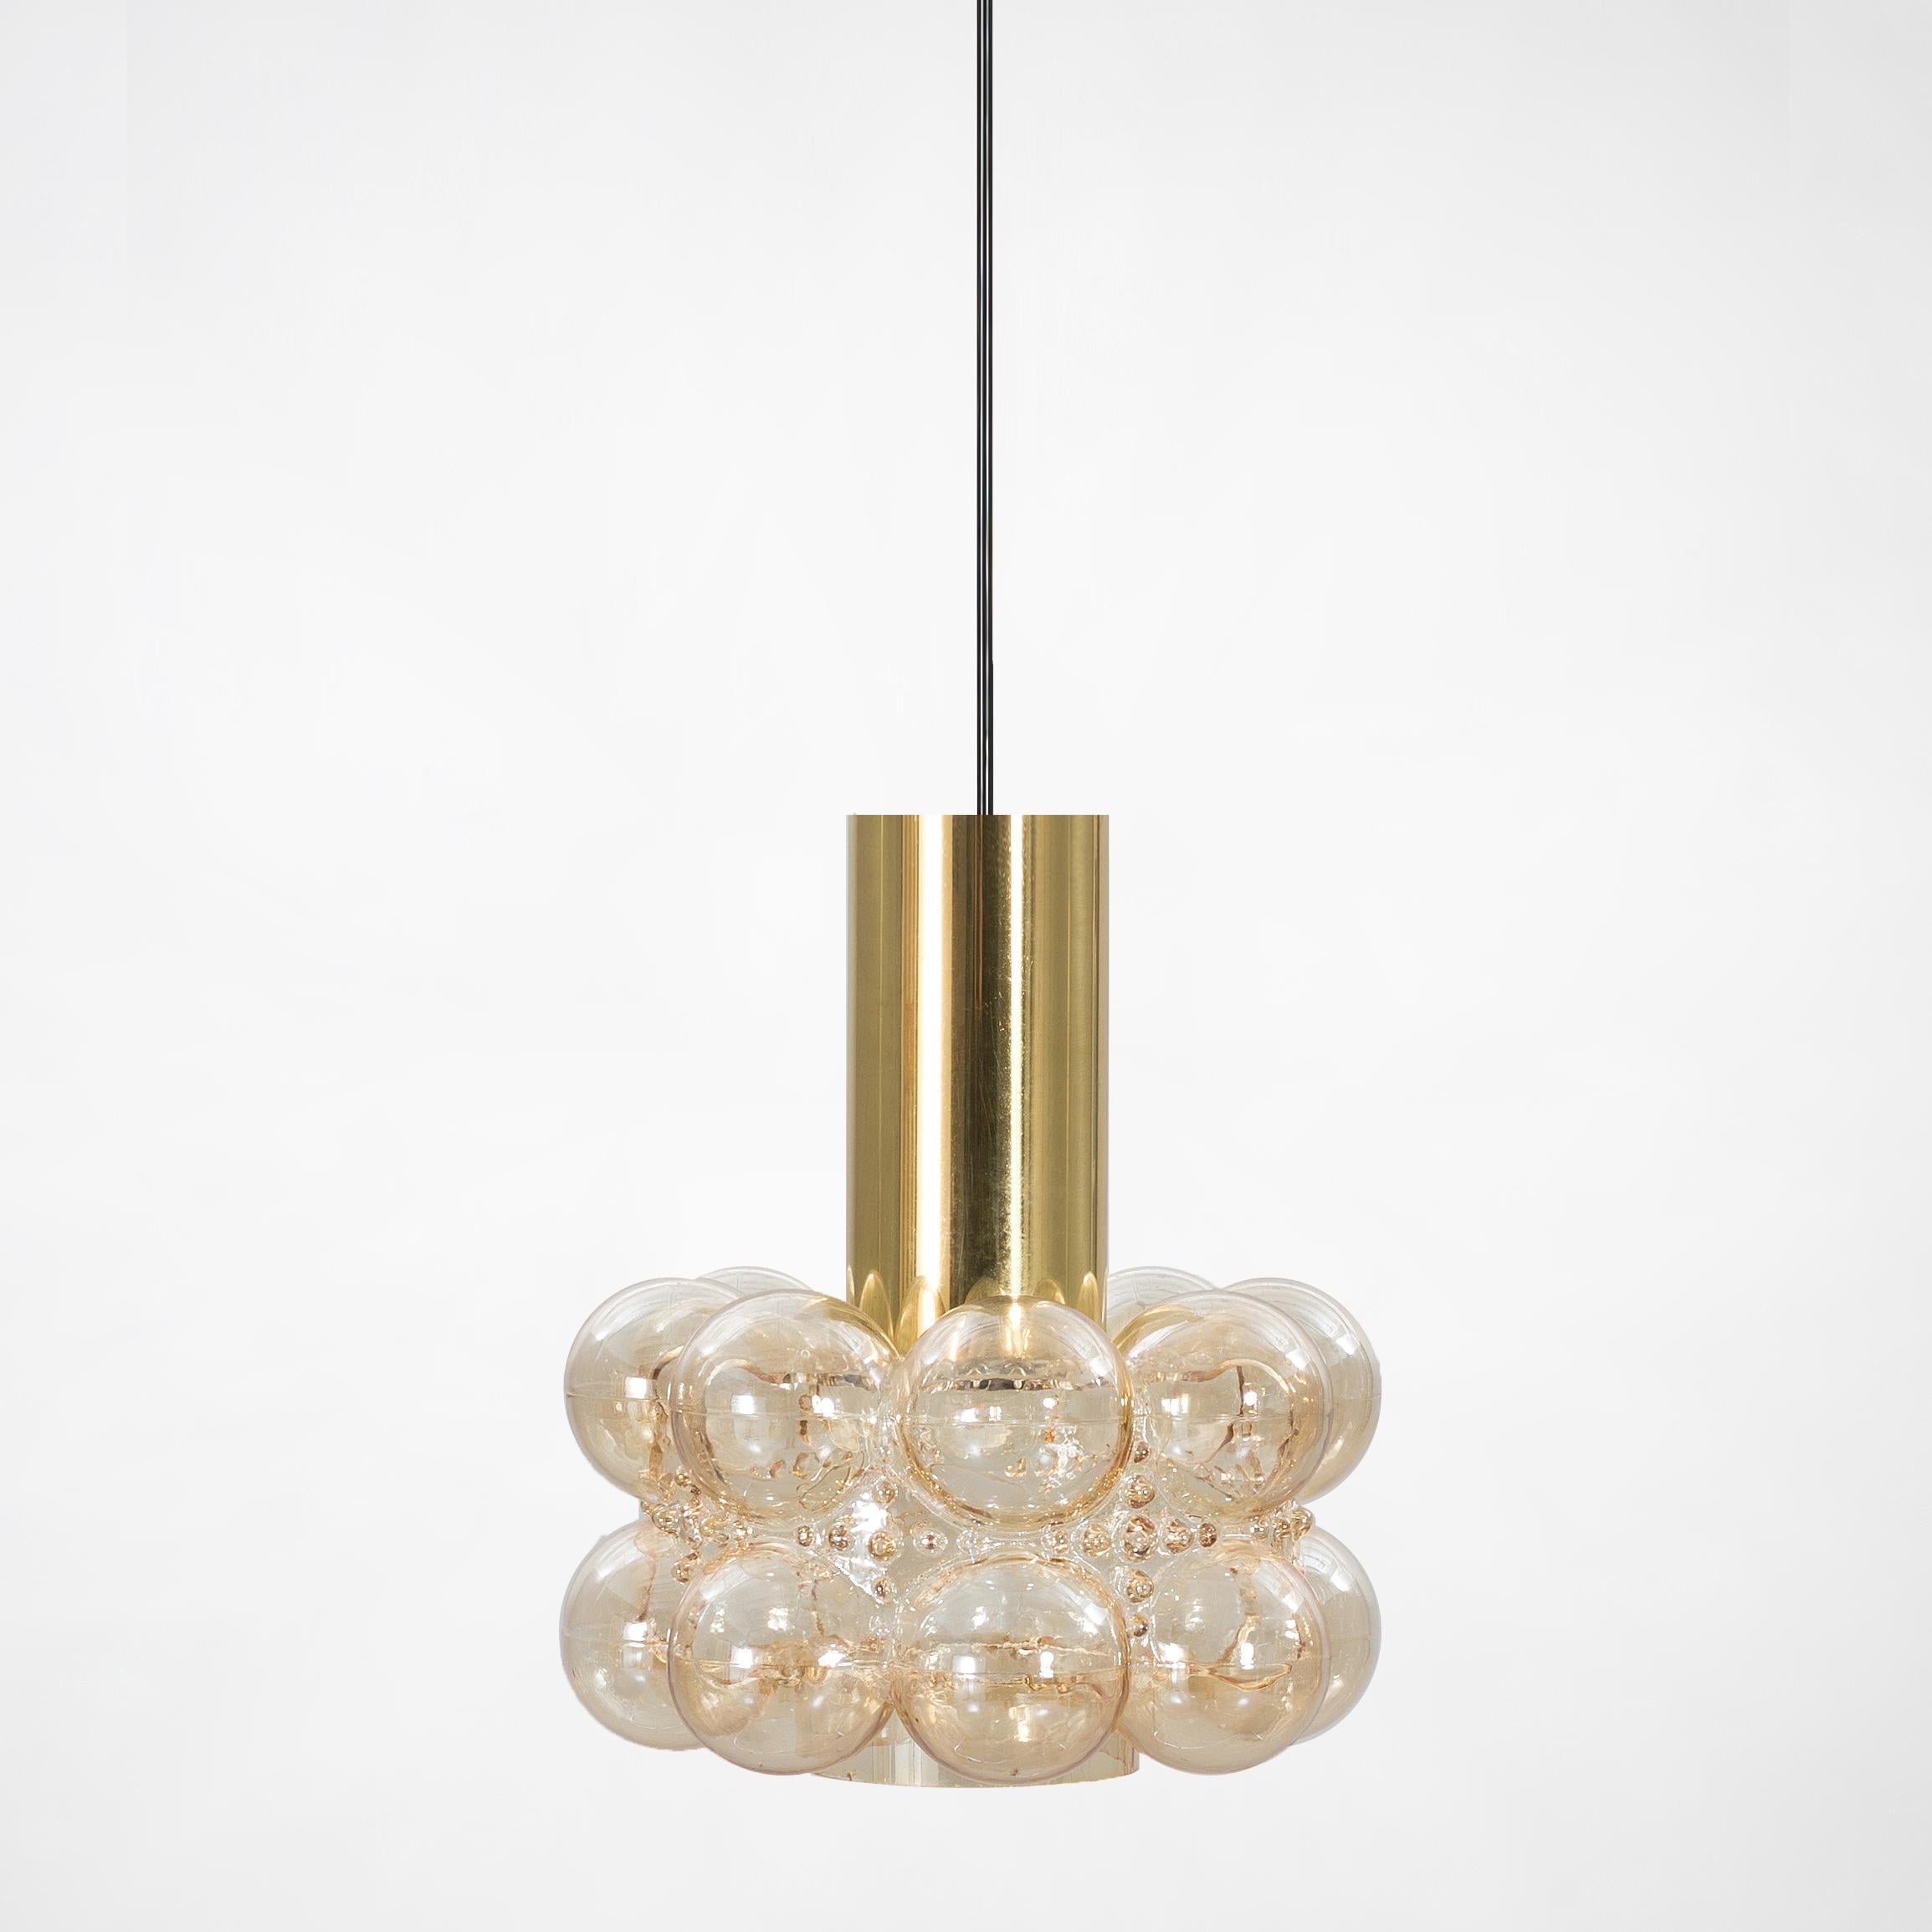 Pair of beautiful bubble glass chandeliers or pendant lights designed by Helena Tynell for Glashütte Limburg. A design Classic, the hand blown glass gives a wonderful warm glow.

The dimensions: Height 80 cm from ceiling, the diameter 30 cm.